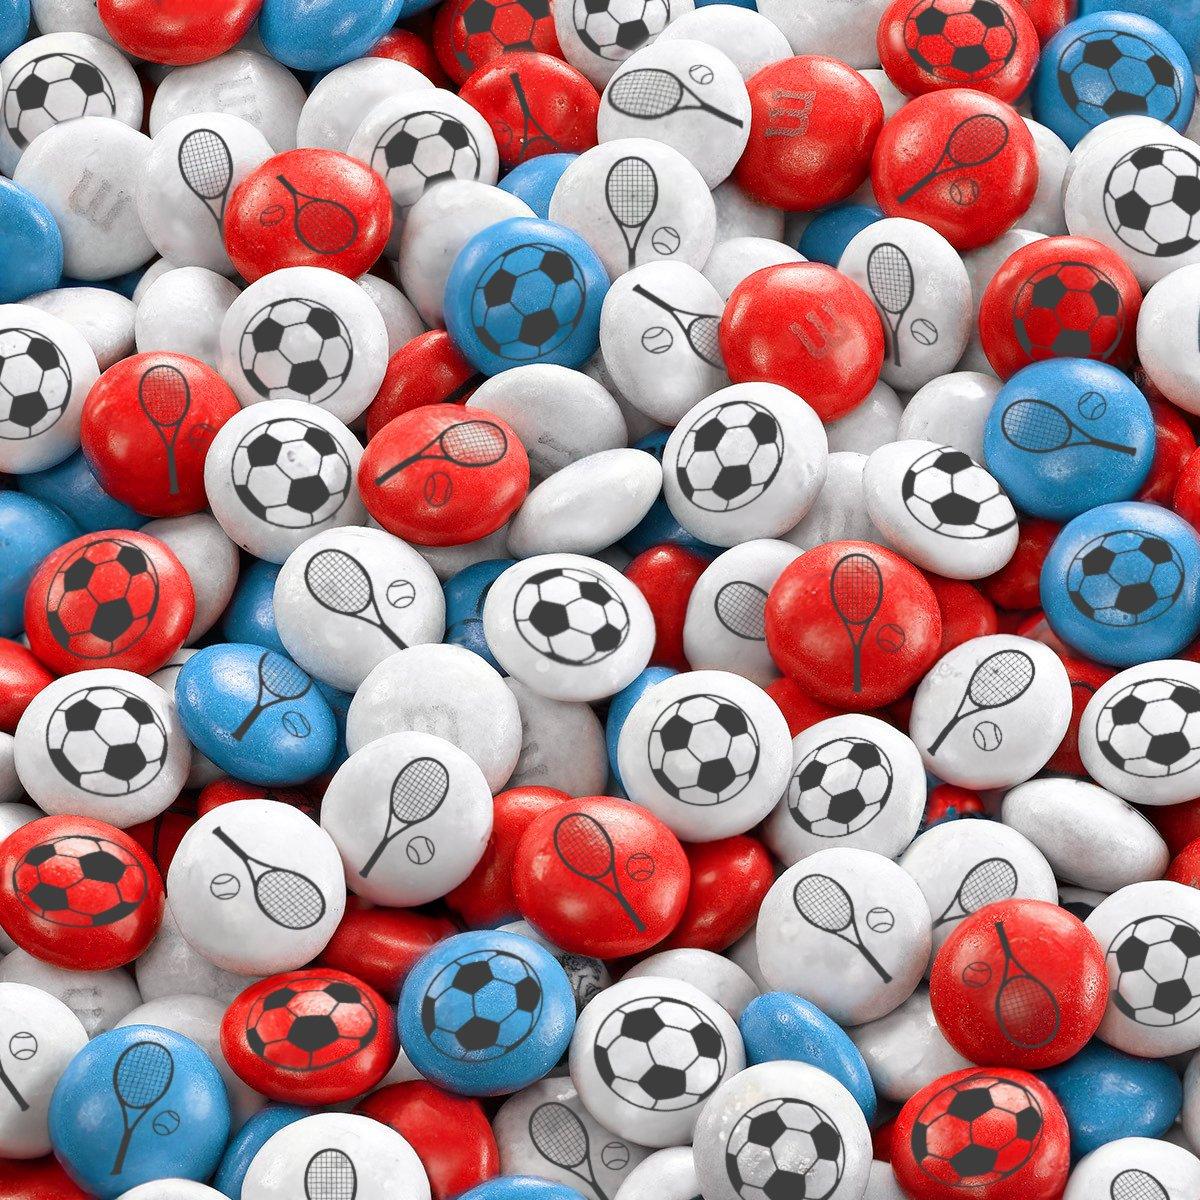 red white and blue M&M'S with soccer and tennis clipart